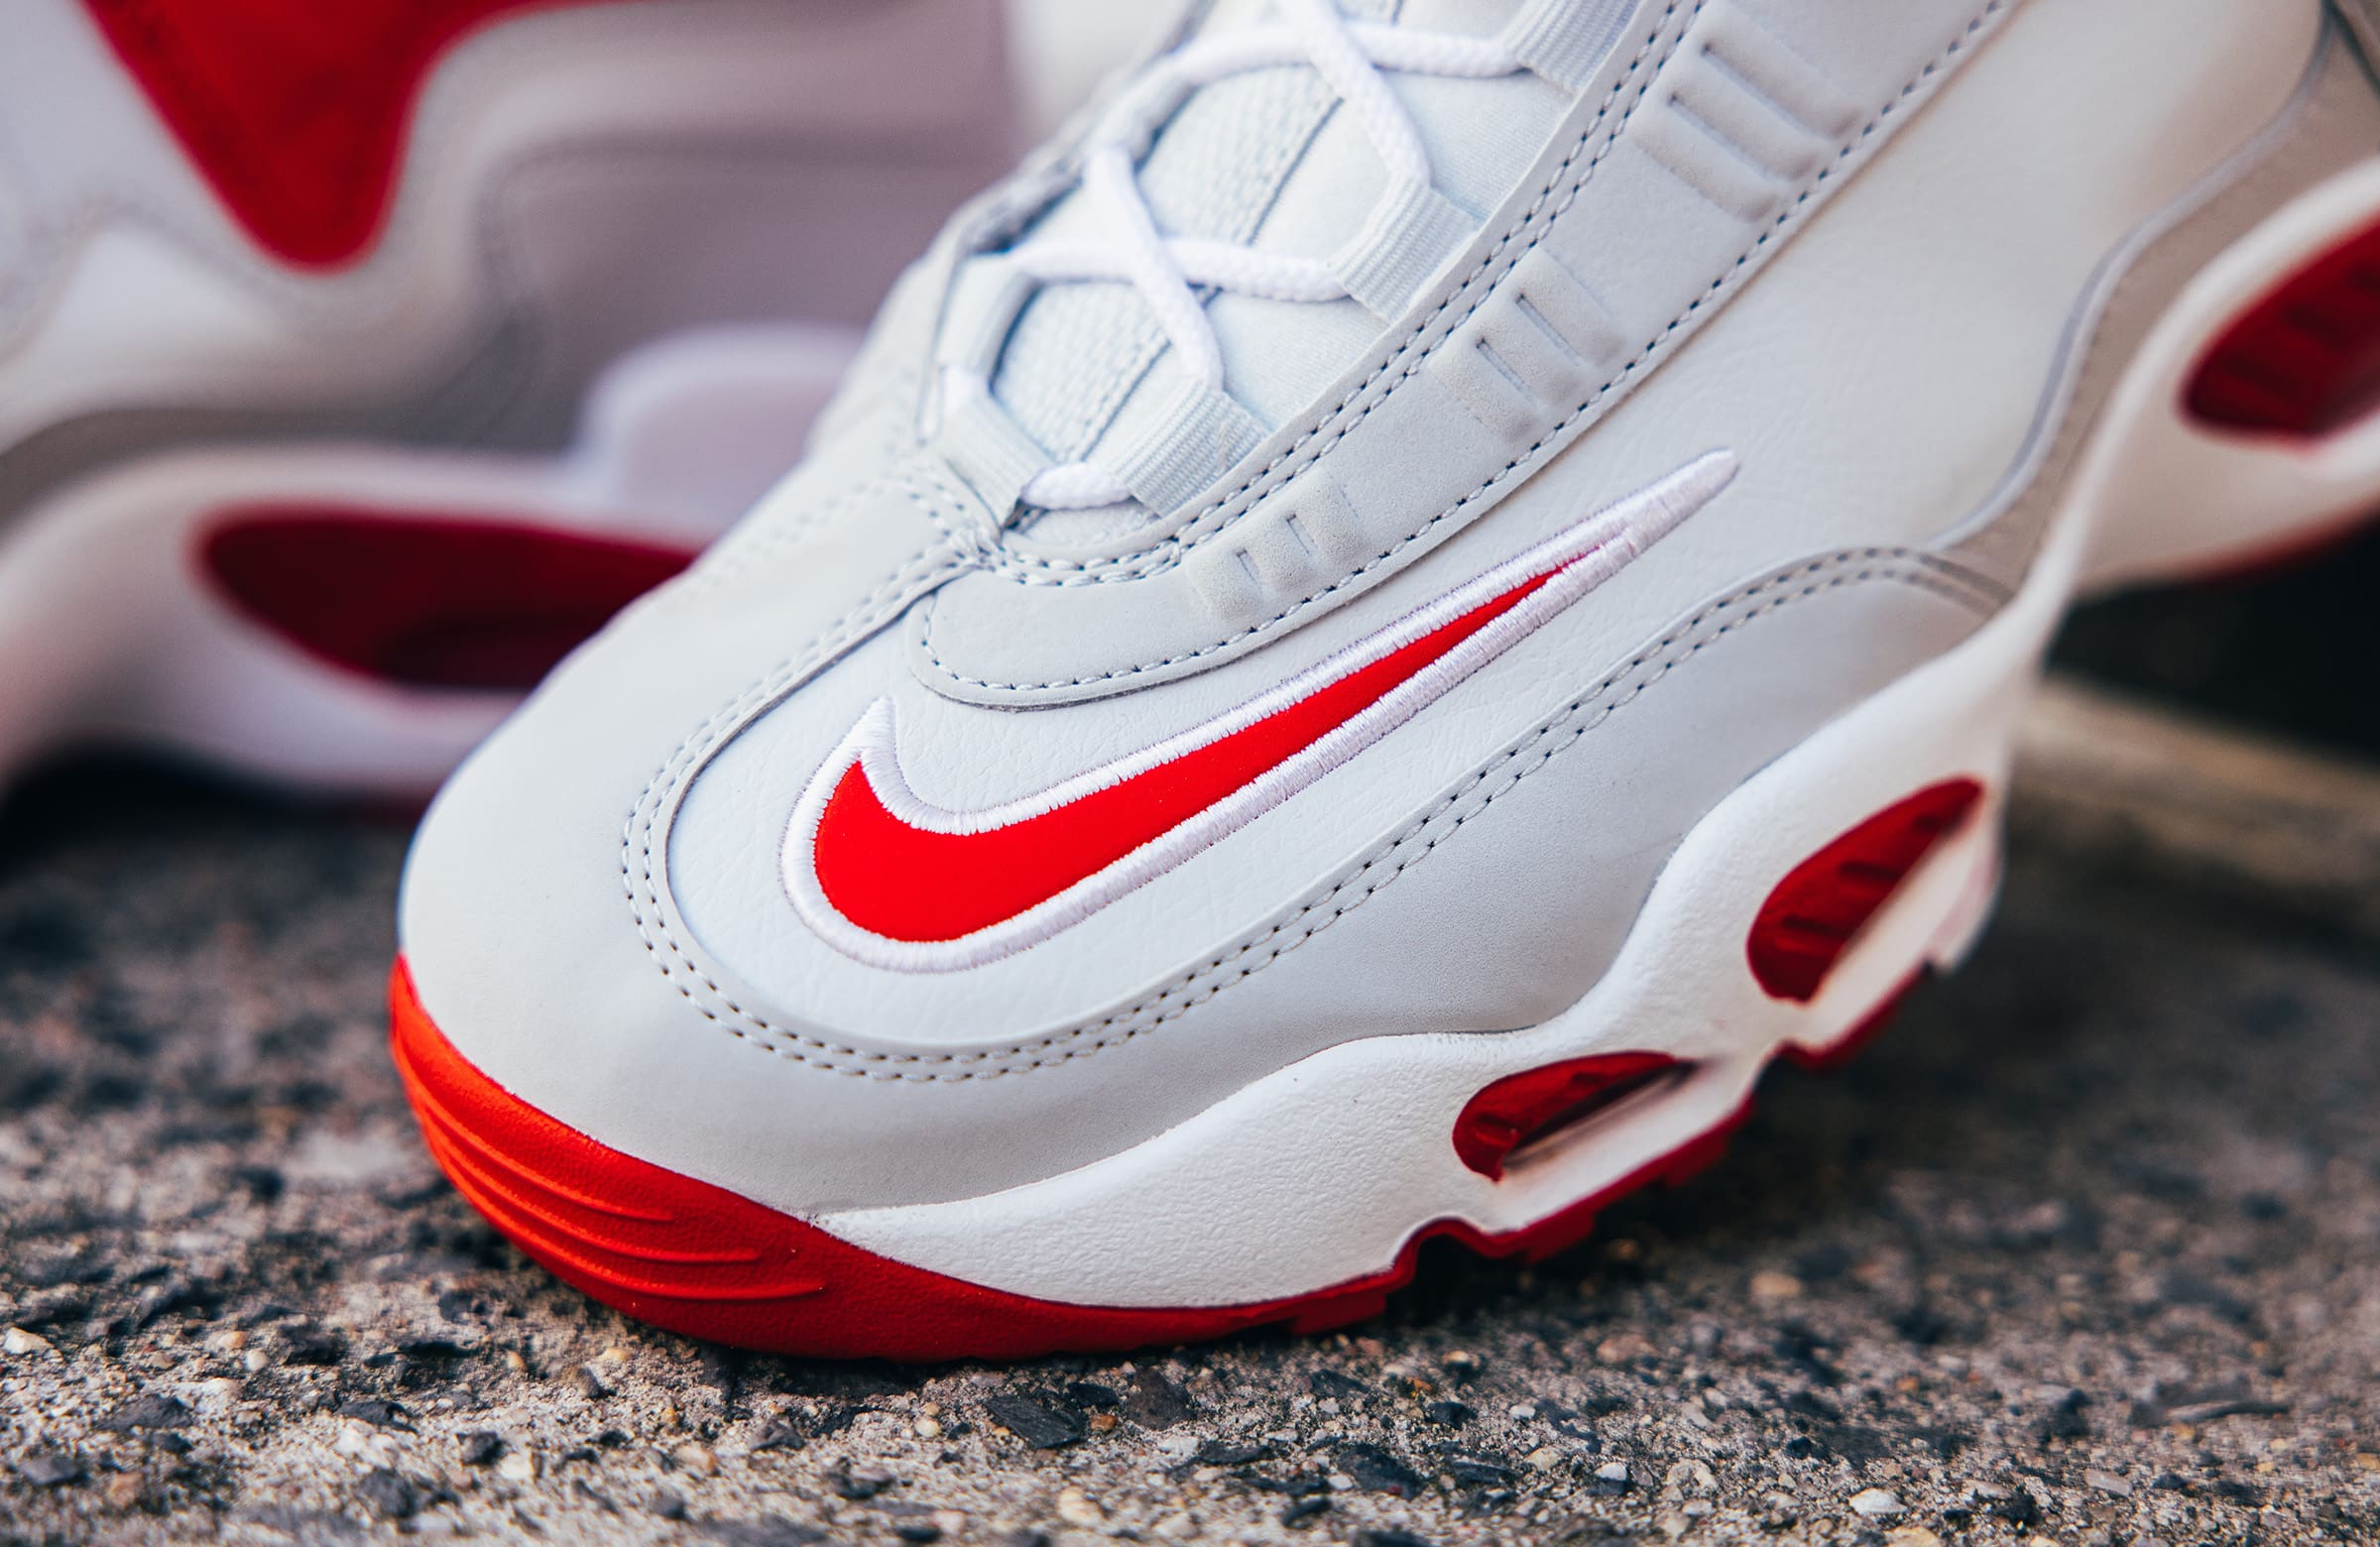 Air Griffey Max 1 Returns in the Varsity Royal Colorway – DTLR